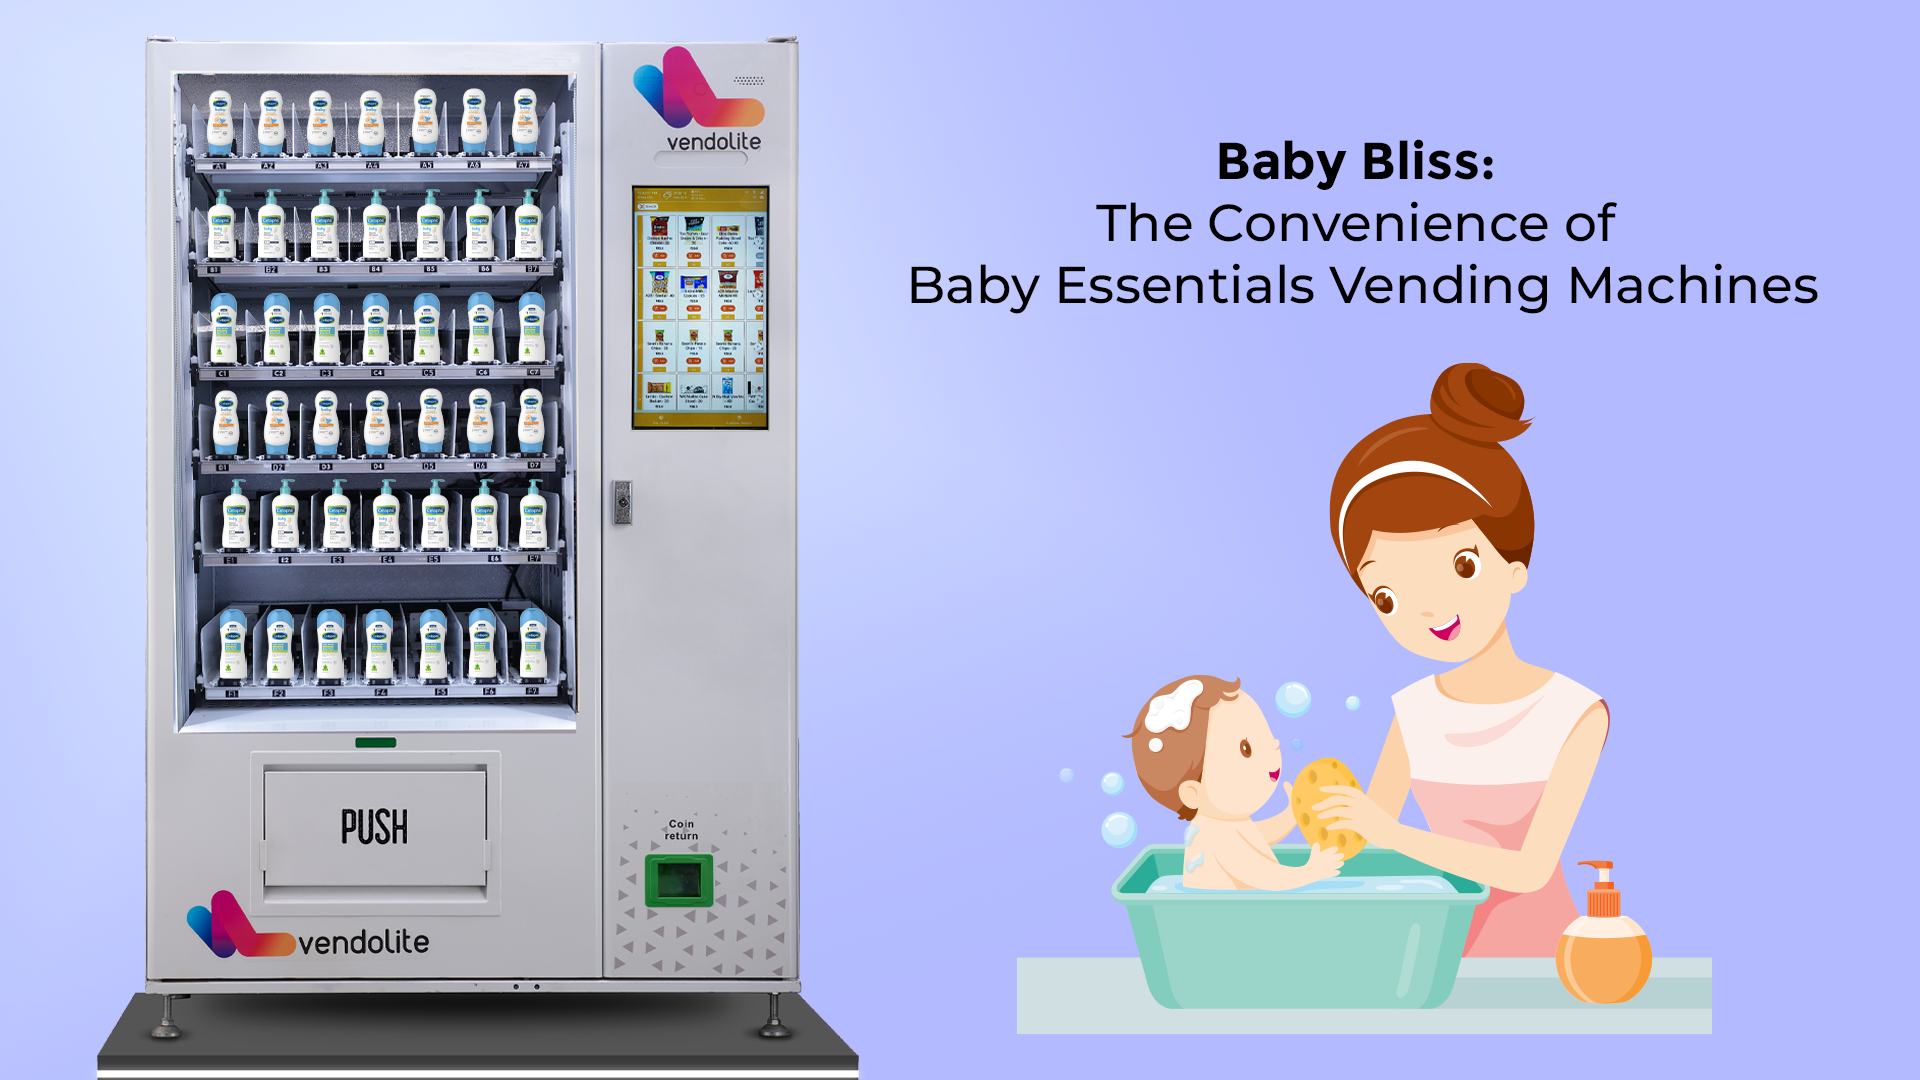 Baby Bliss: The Convenience of Baby Essentials Vending Machines